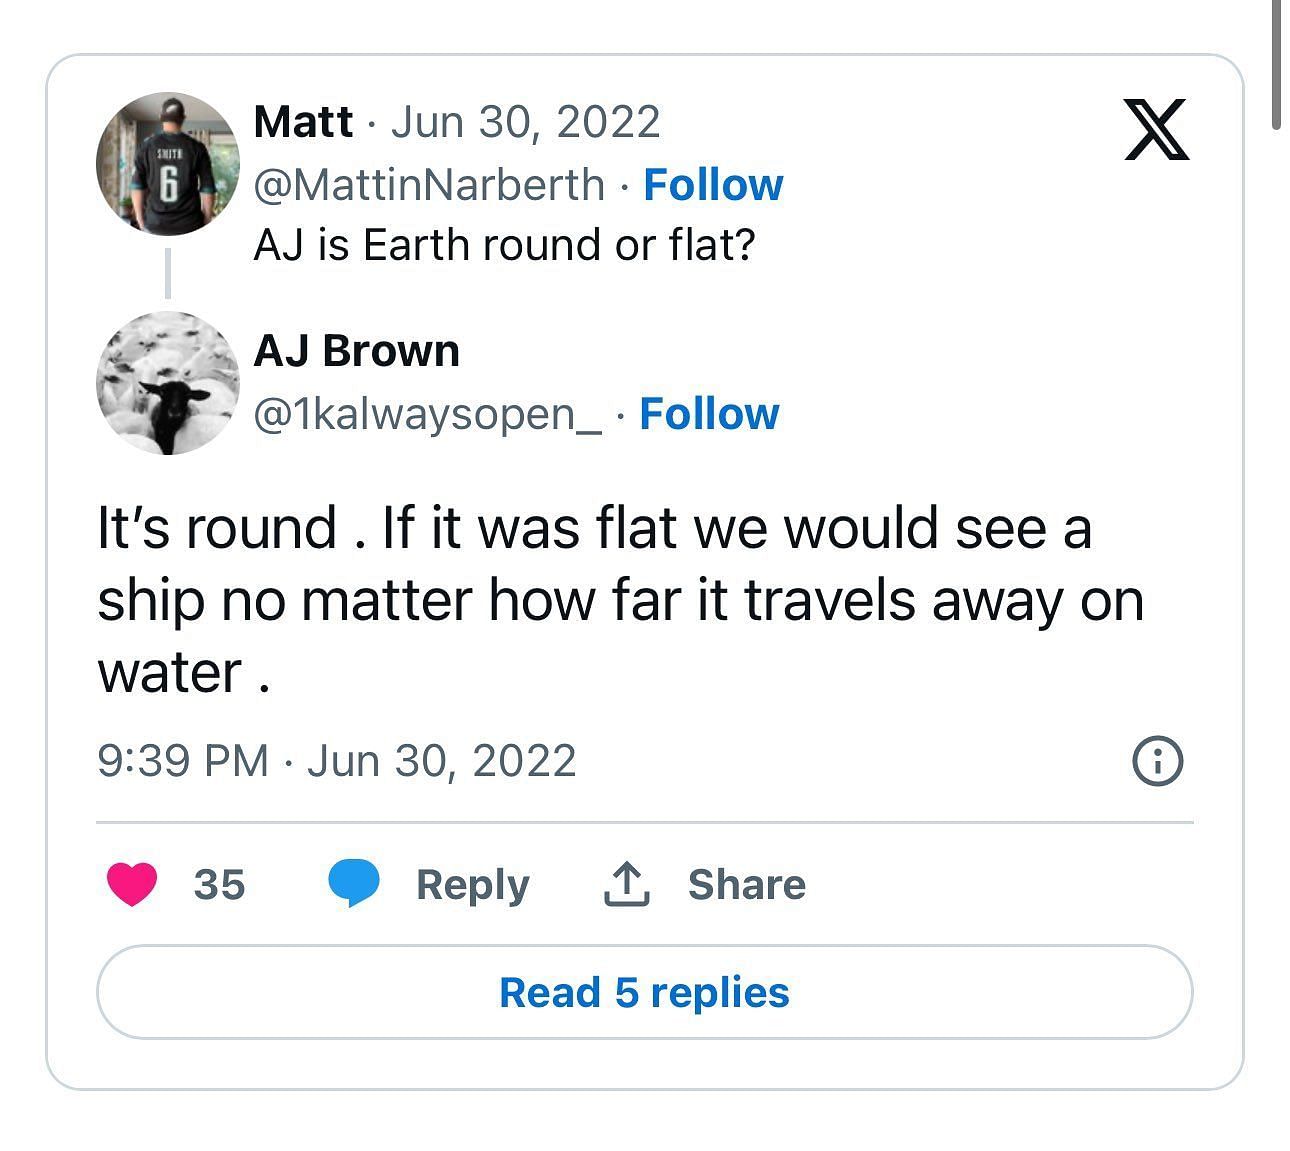 AJ Brown answering what the world's shape is